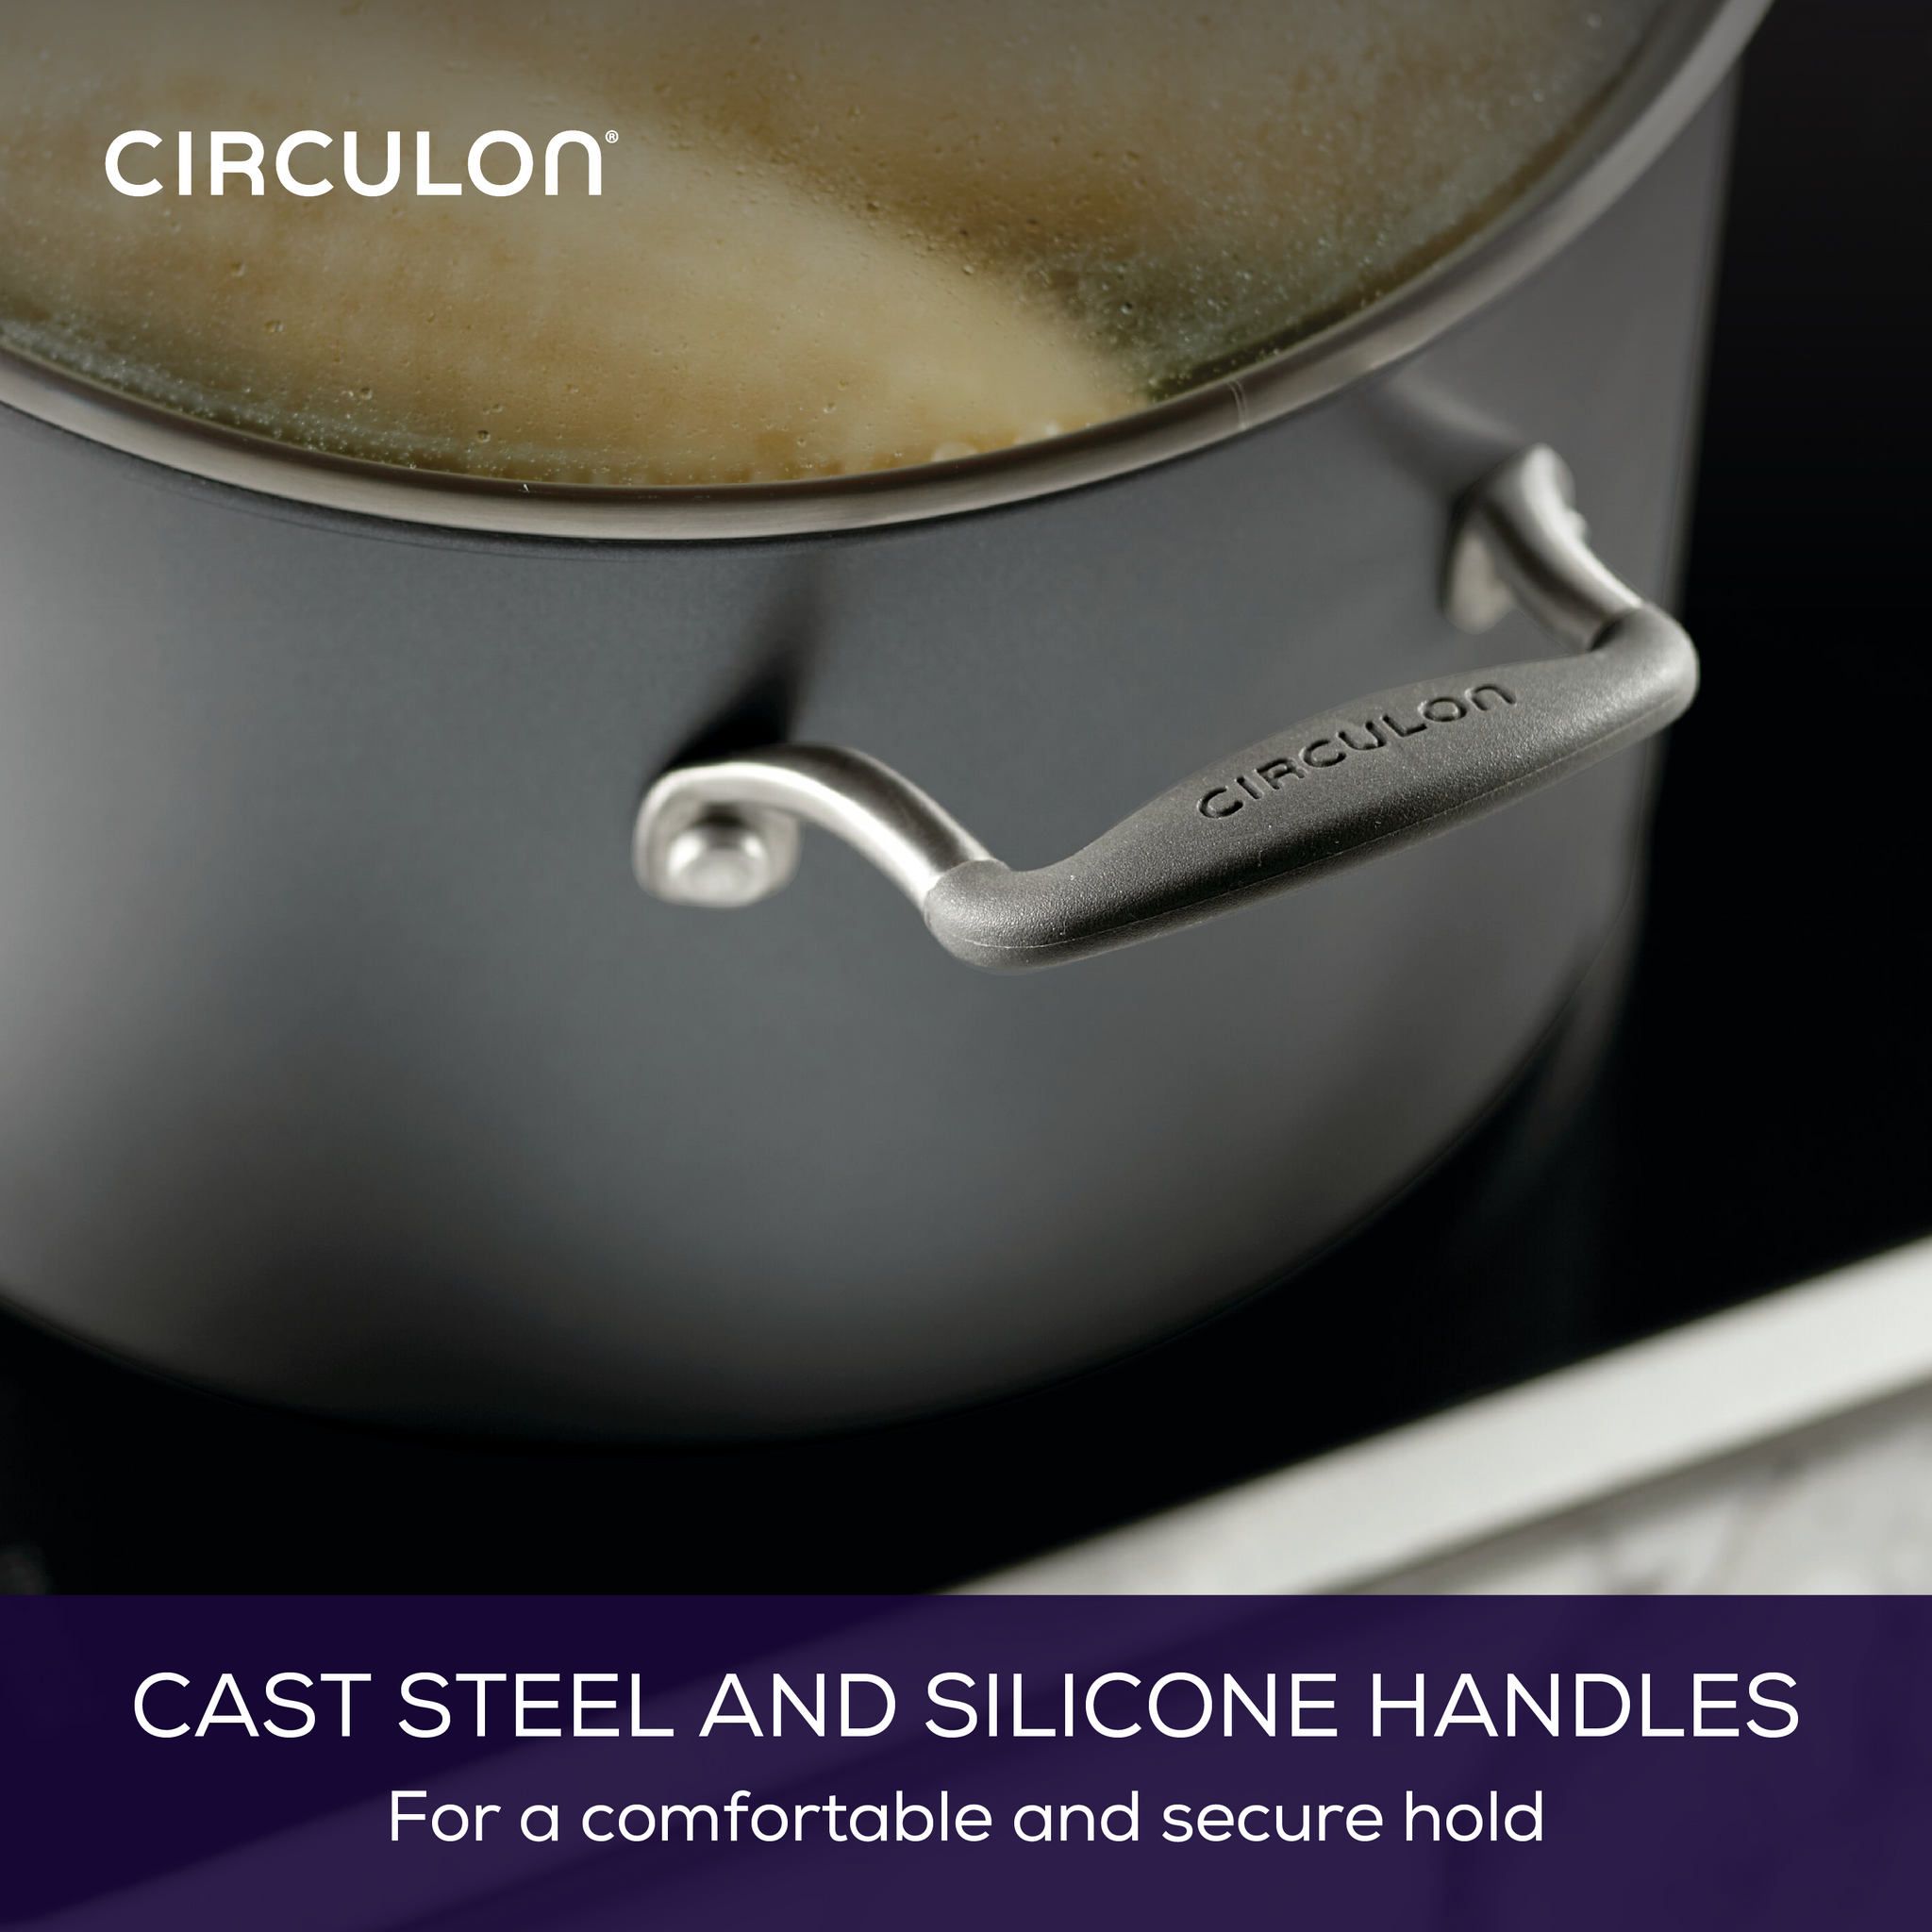 Create With Mom: Cooking on Circulon Pans